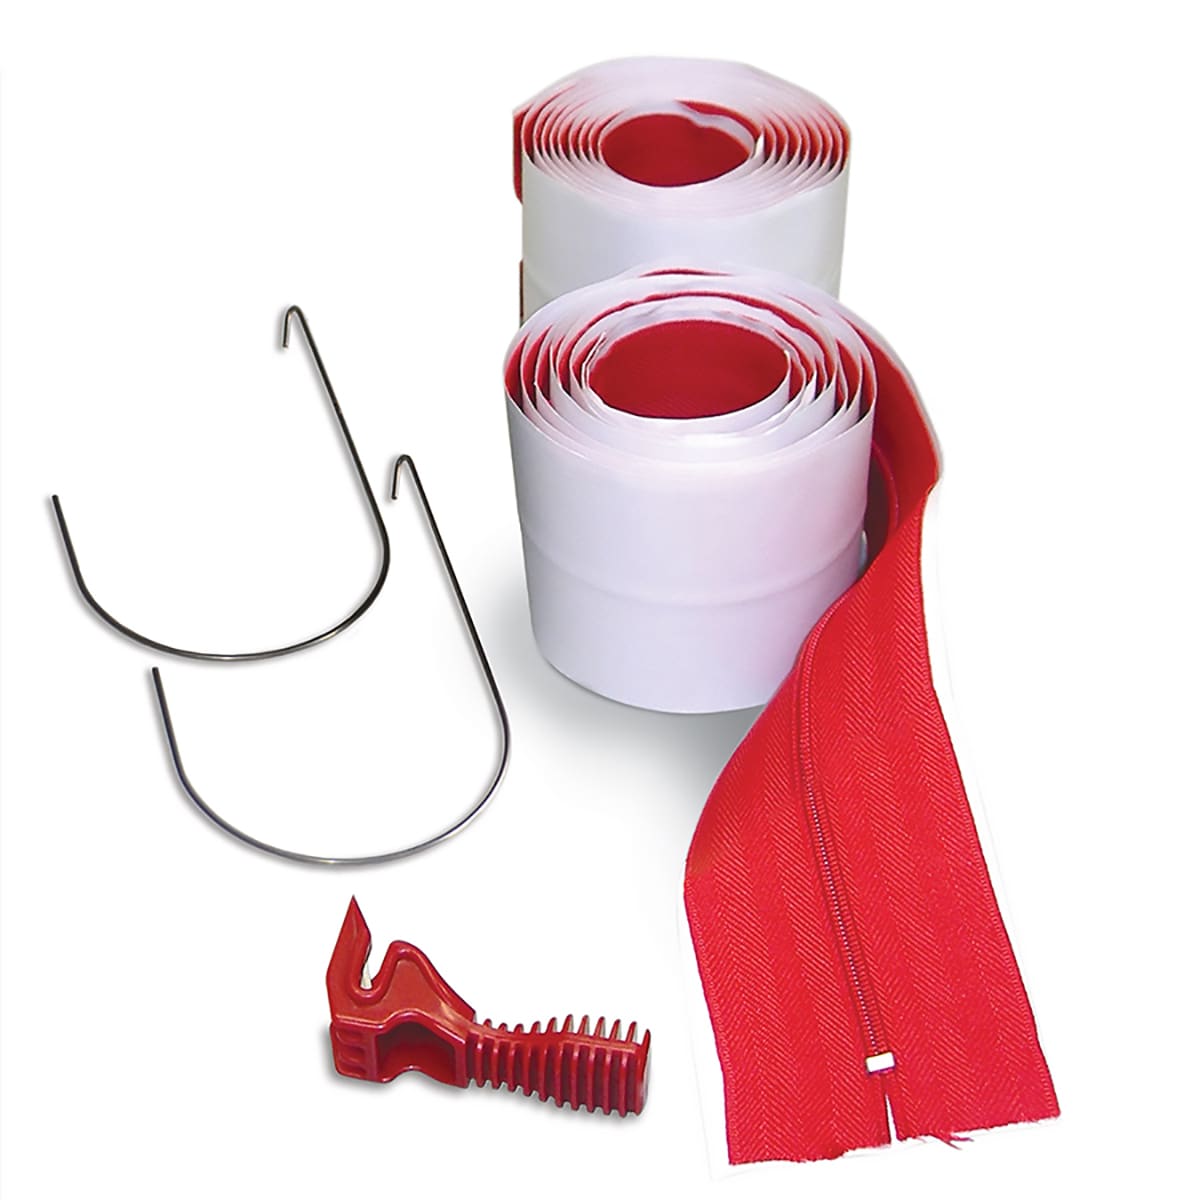 Heavy Duty Containment Zippers 12ct - Airtight Seal, Peel & Stick